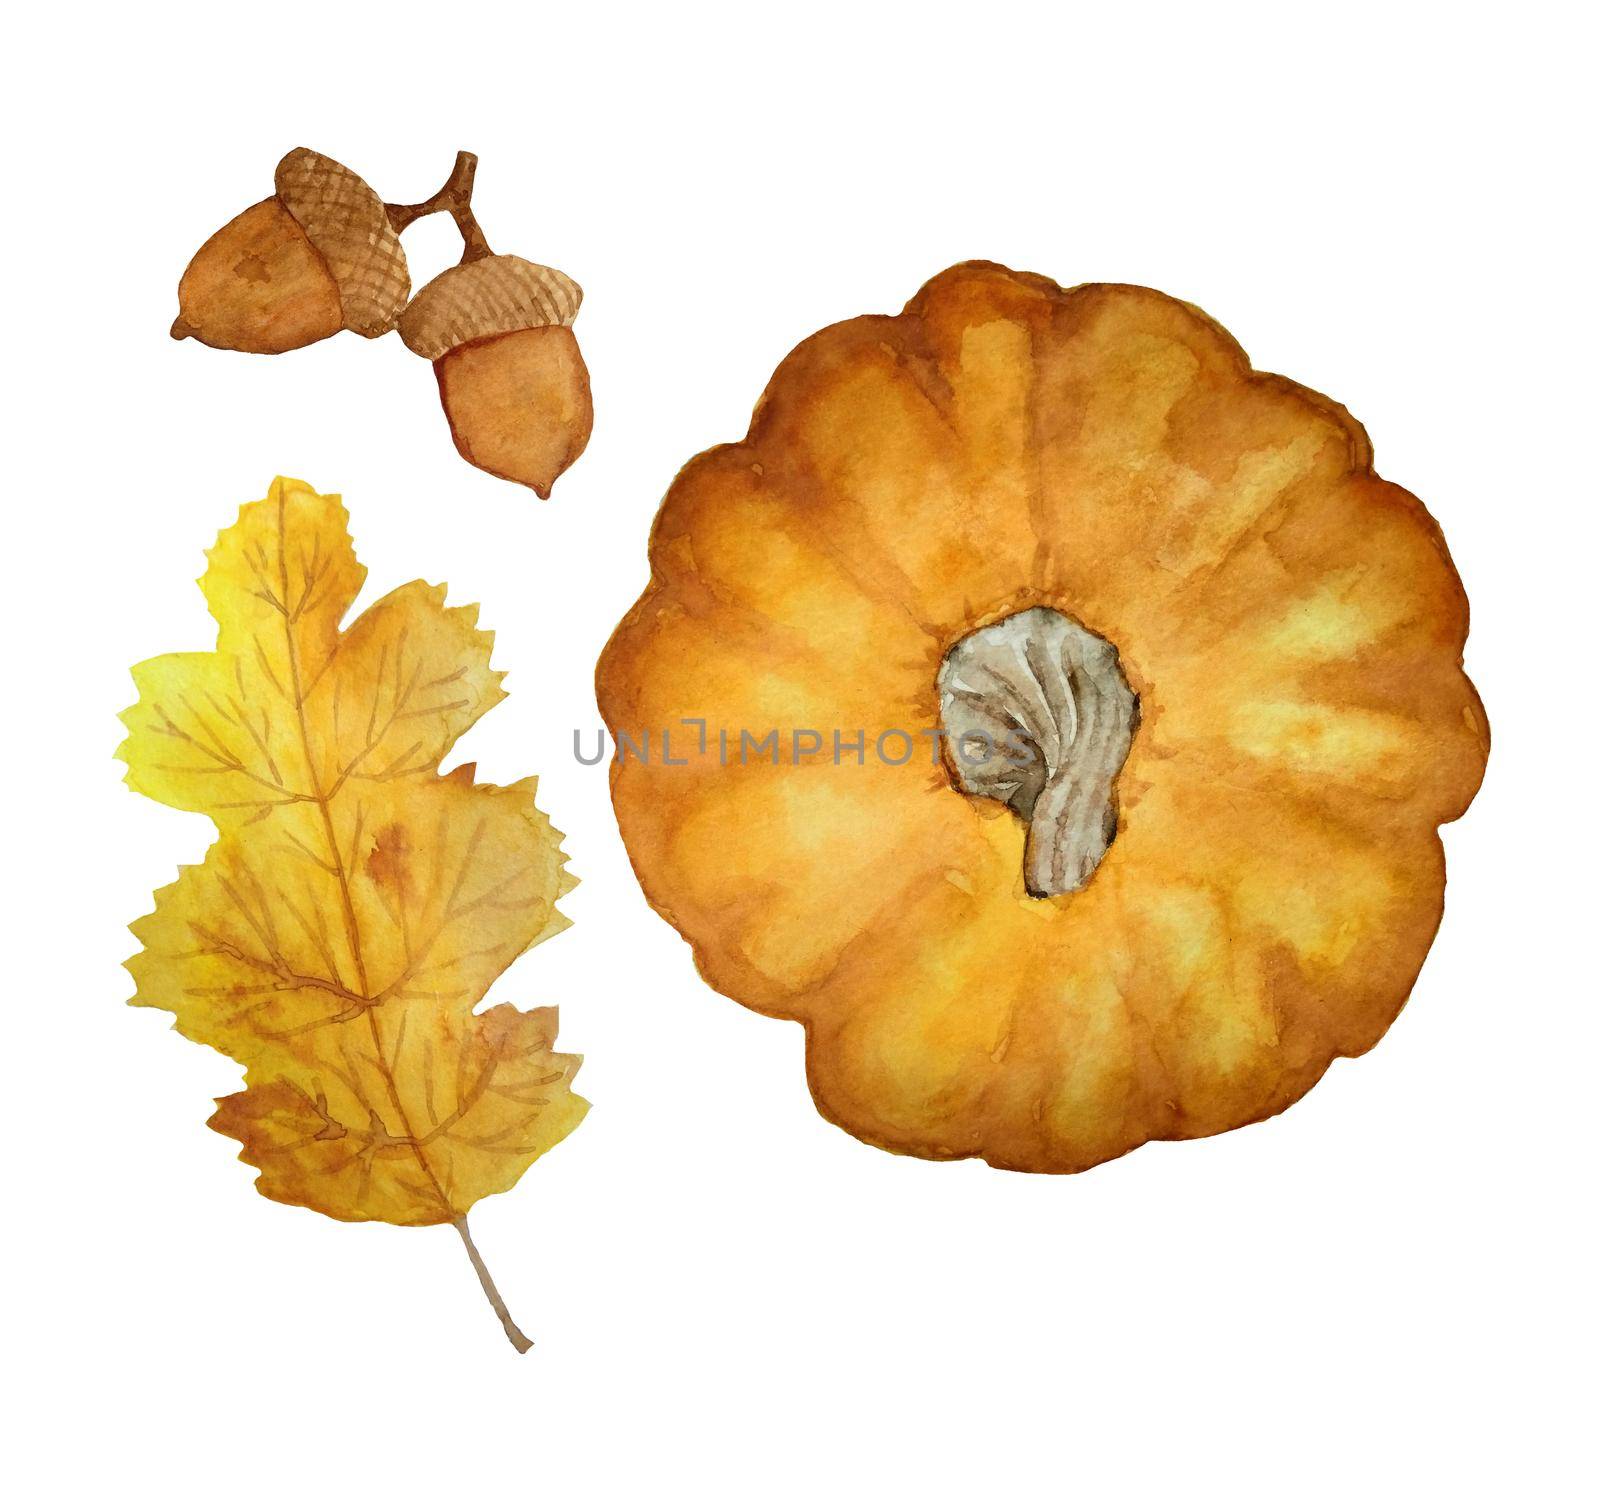 Watercolor hand drawn set of orange pumpkin view from above, october fall autumn leaves lef and oak acorn. Forest wood garden harvest nature concept. Thanksgiving decoration design posters elements